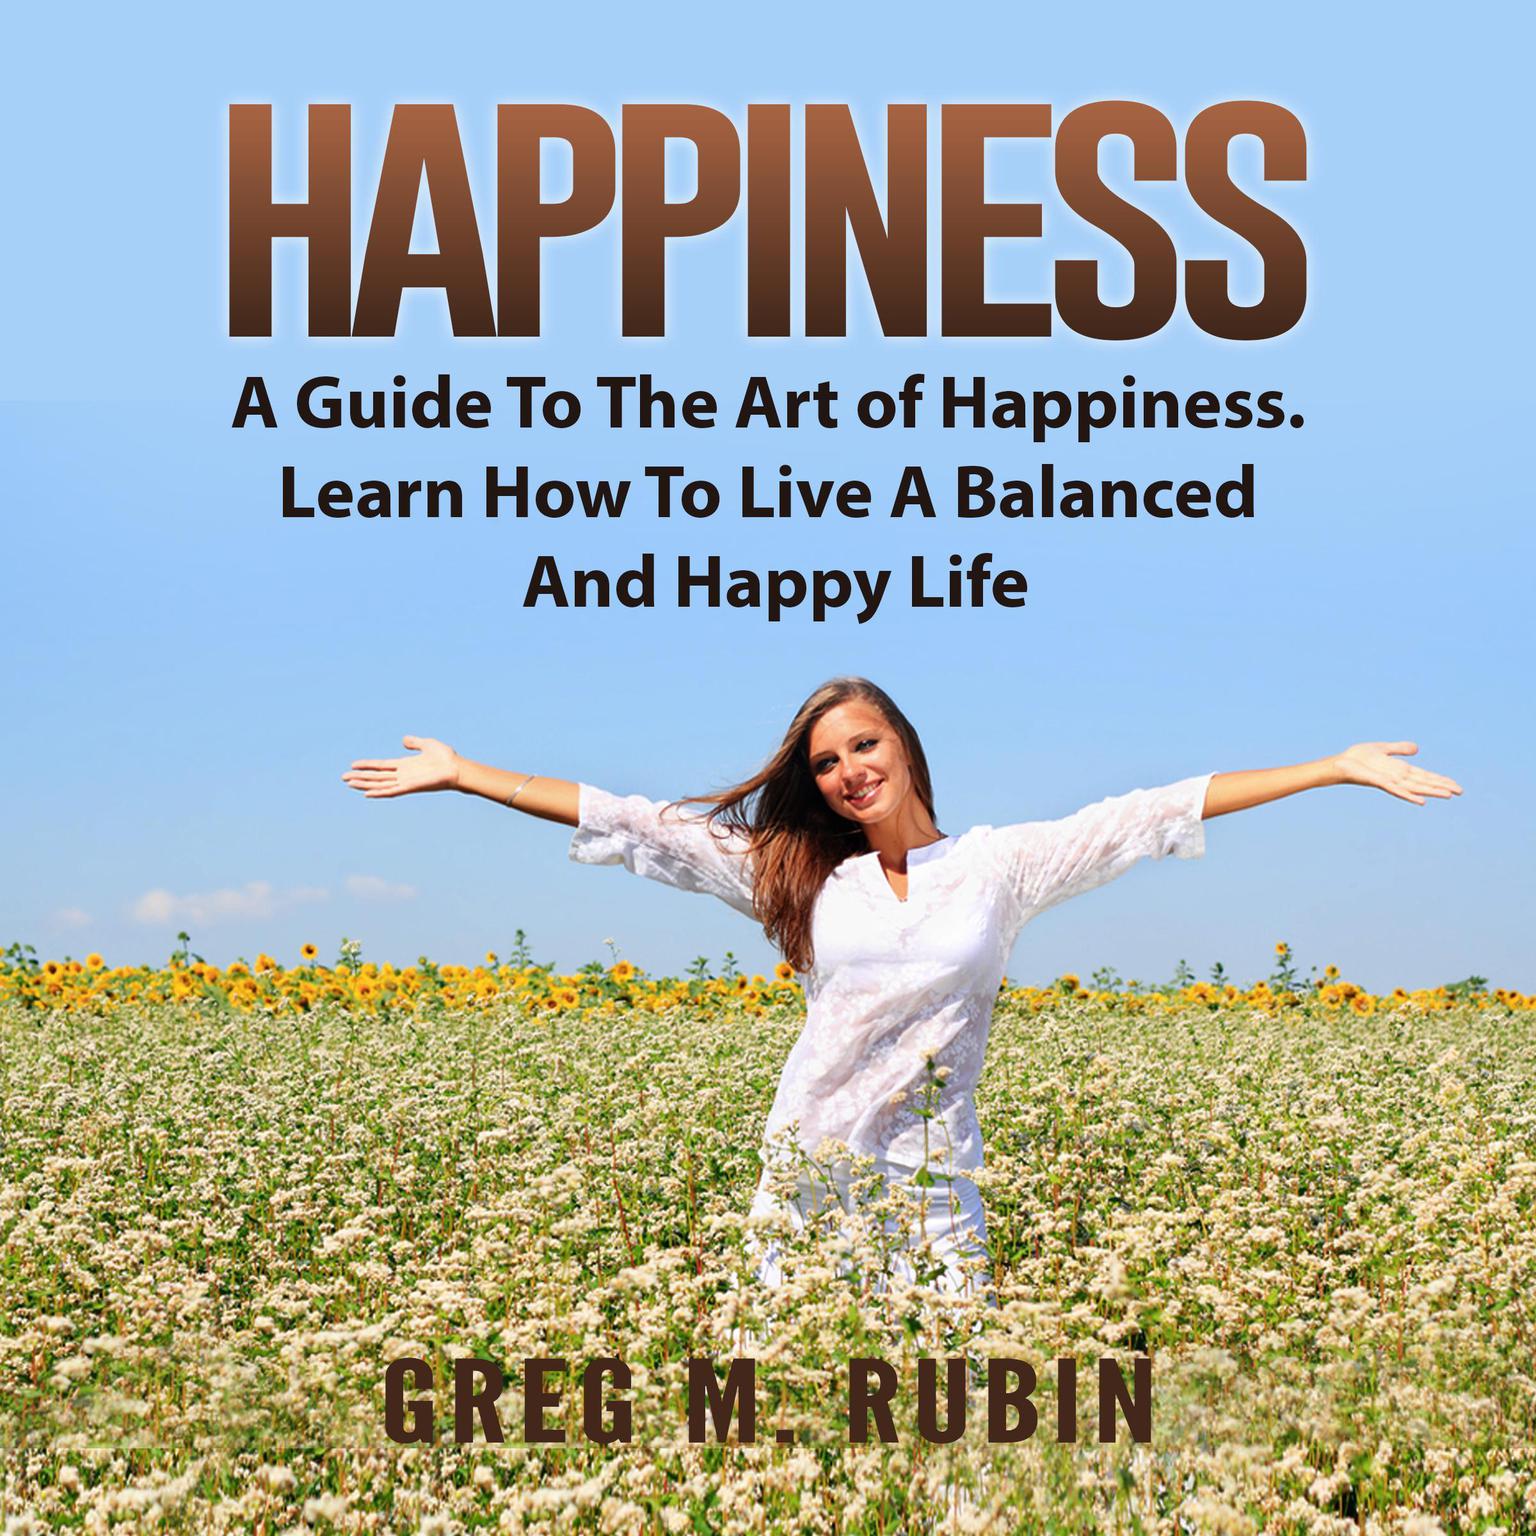 Happiness: A Guide To The Art of Happiness. Learn How To Live A Balanced And Happy Life Audiobook, by Greg M. Rubin